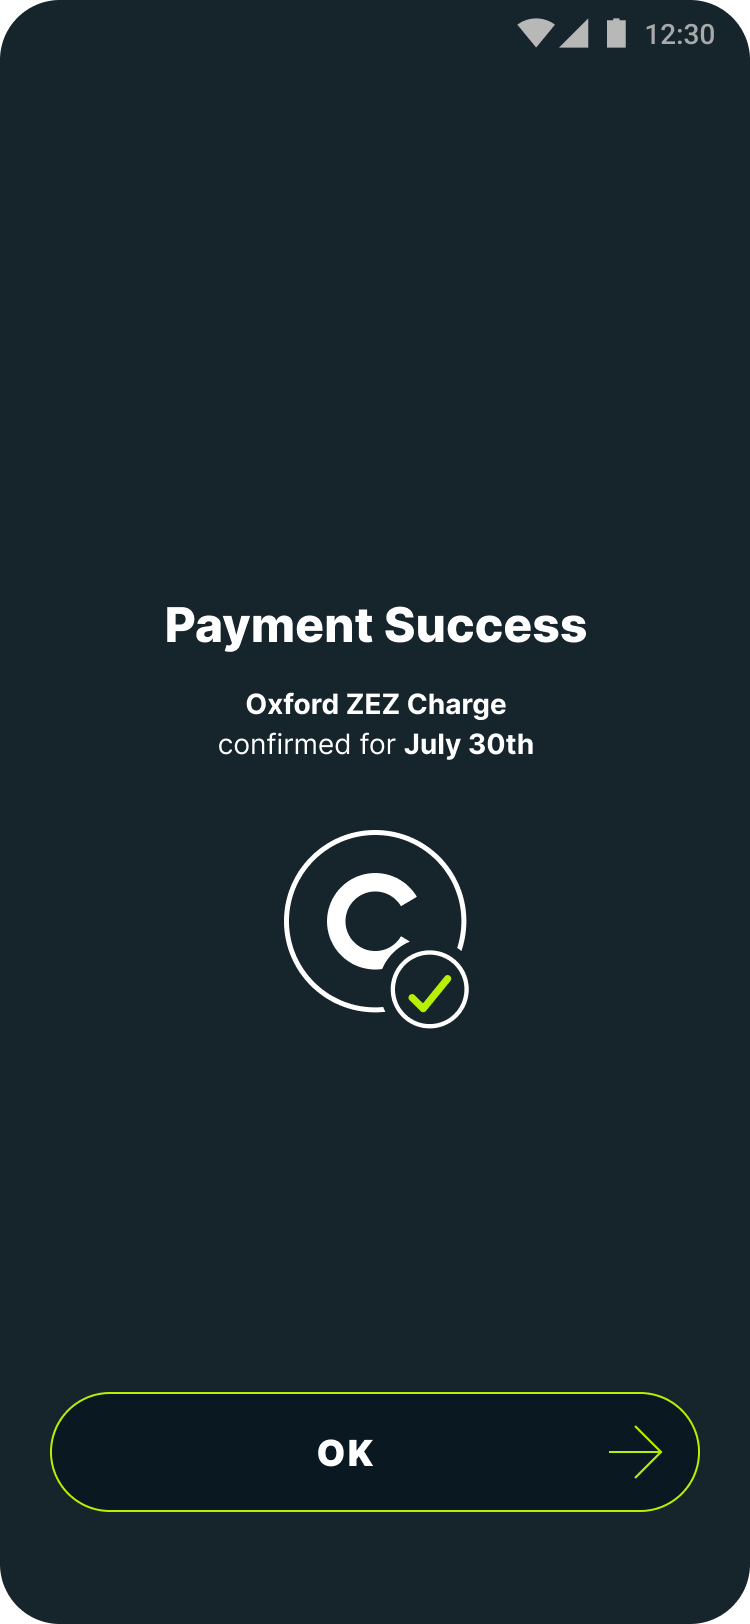 Successfully paying the Oxford ZEZ on Caura